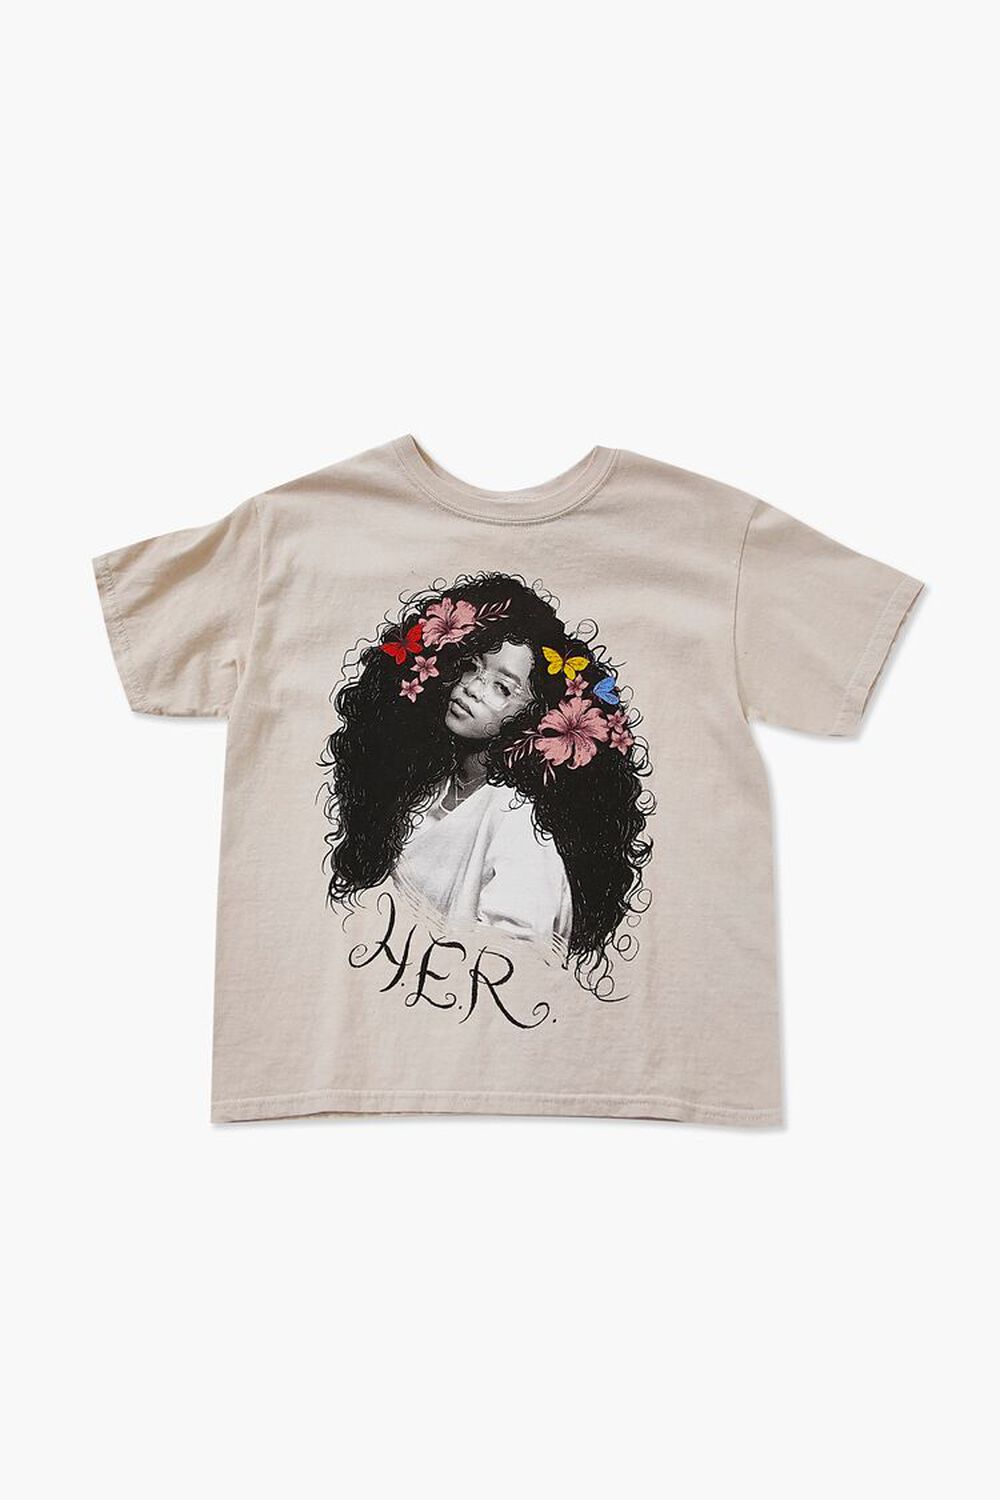 TAUPE/MULTI Kids HER Graphic Tee (Girls + Boys), image 1